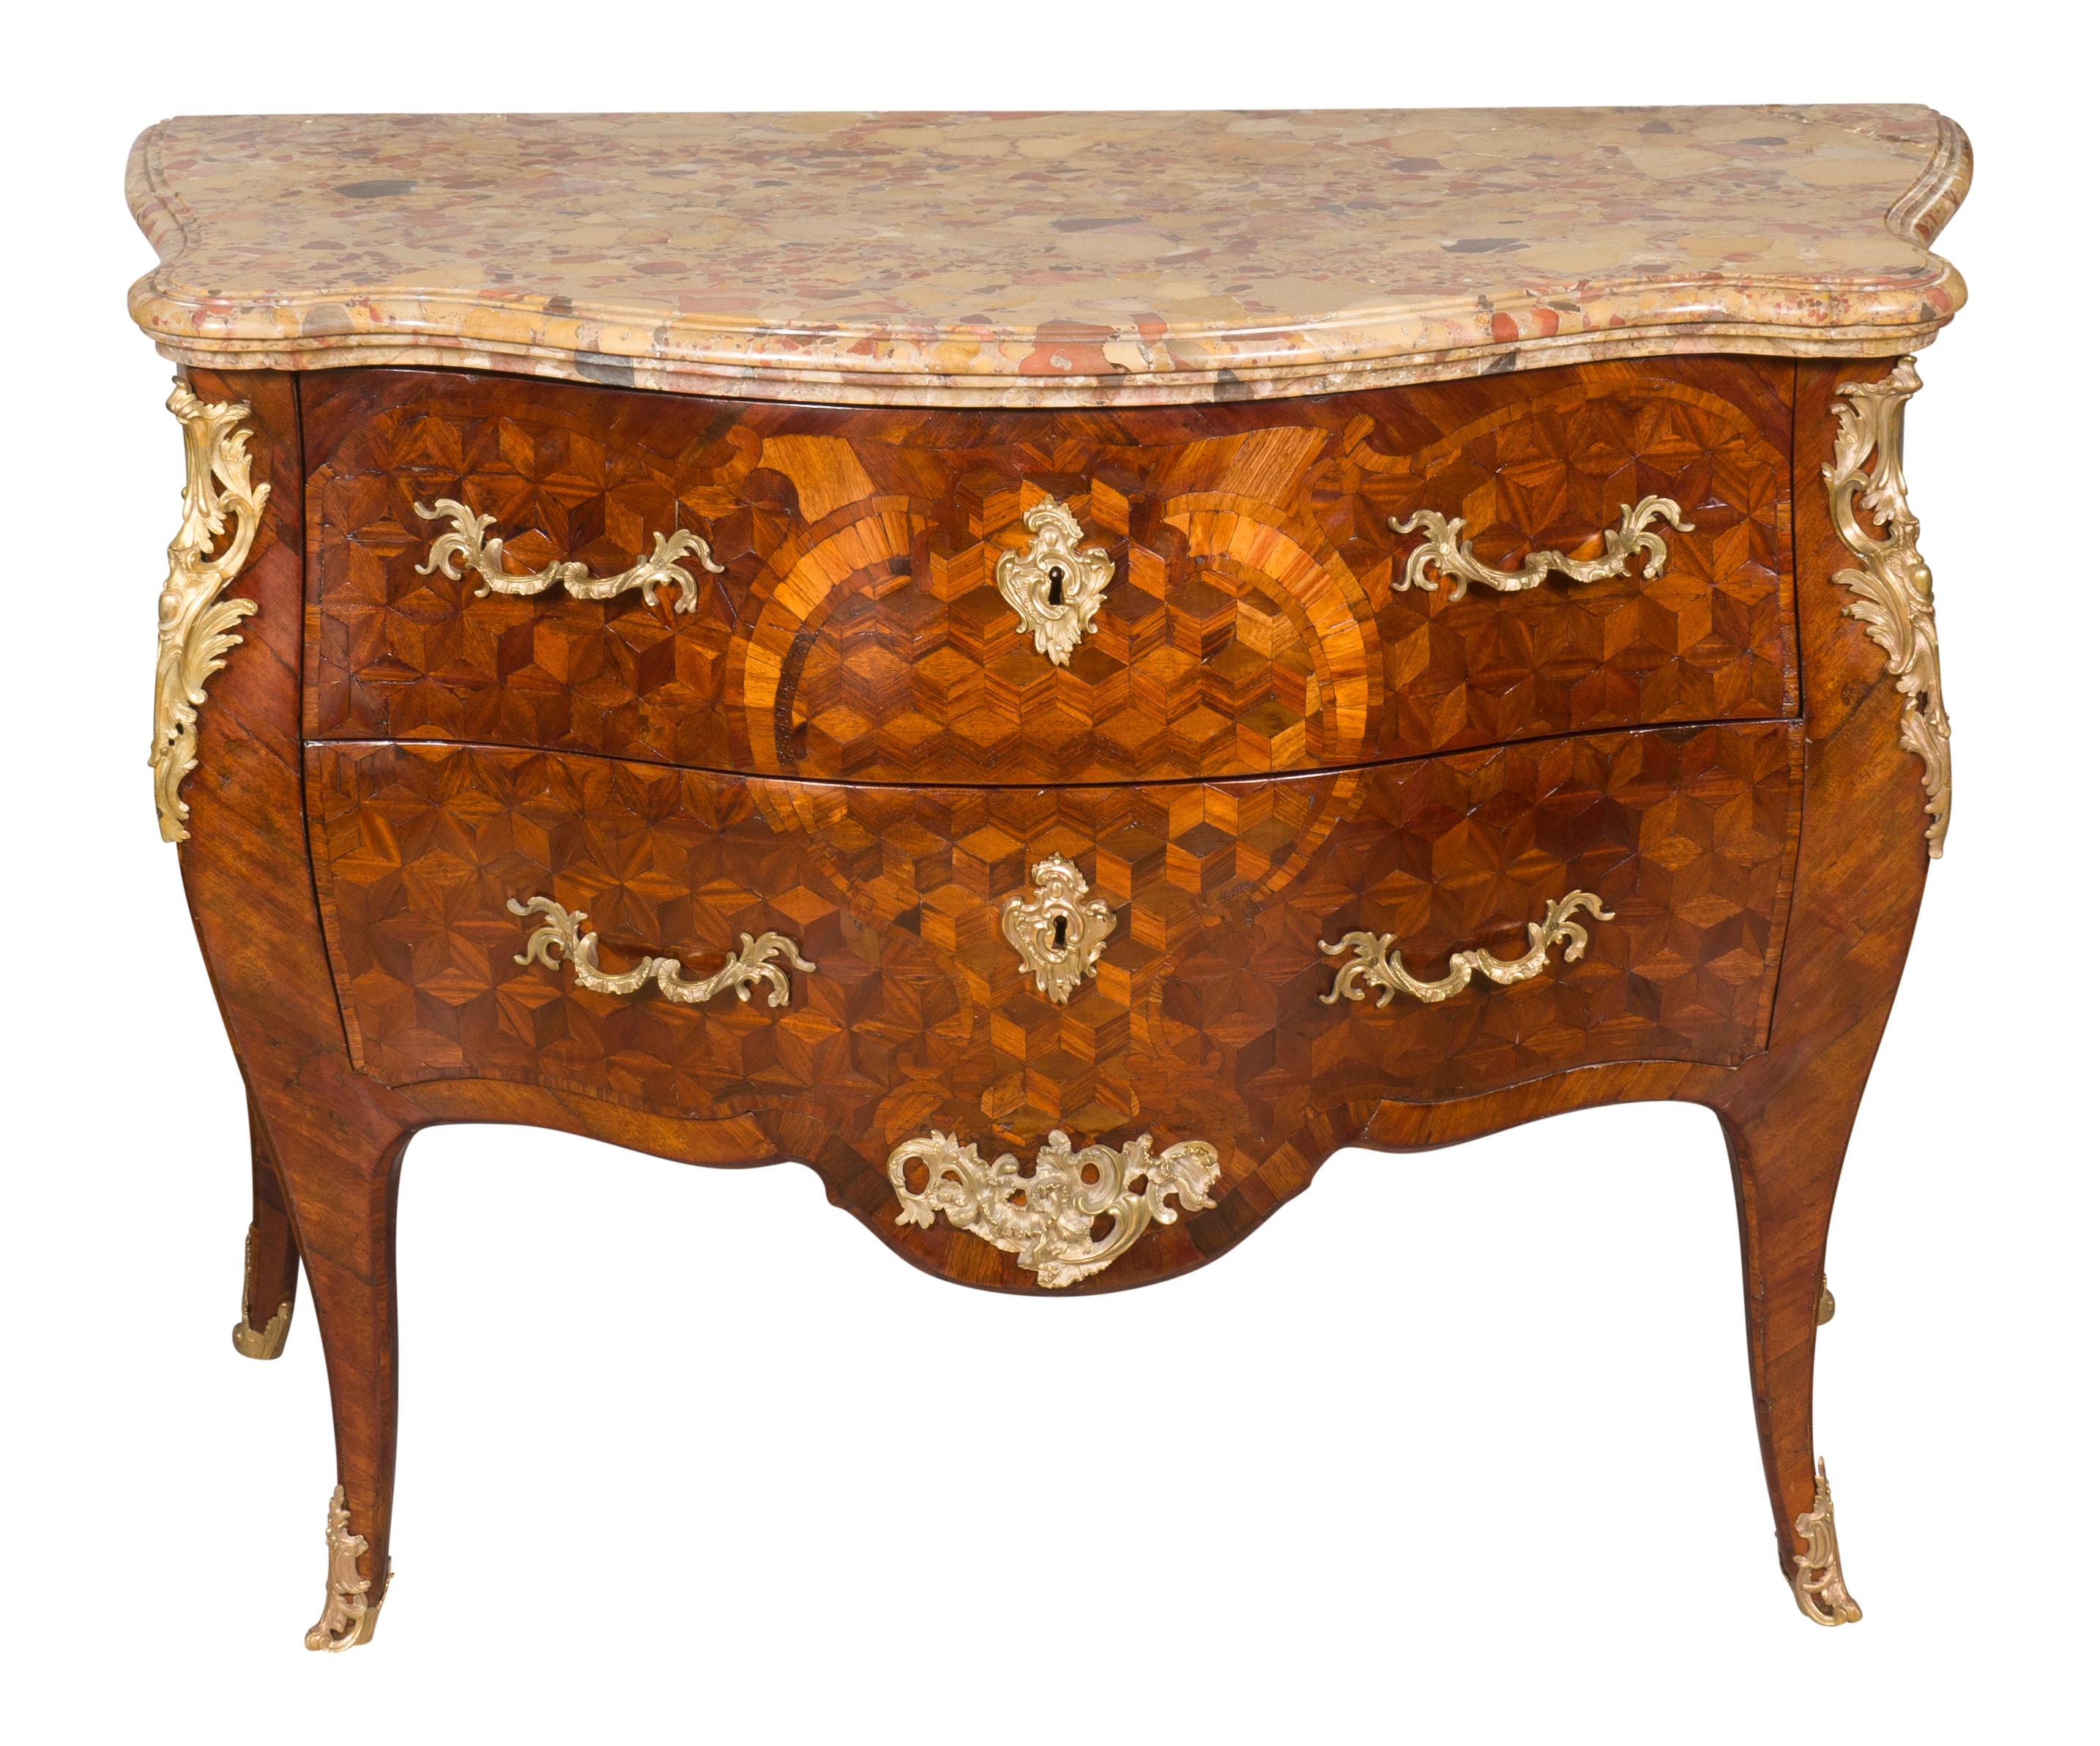 With a thick serpentine breche de alep marble top over a conforming case with two conforming drawers with bronze handles raised on cabriole legs with sabot feet. From a Bellevue Avenue Newport Rhode Island estate.